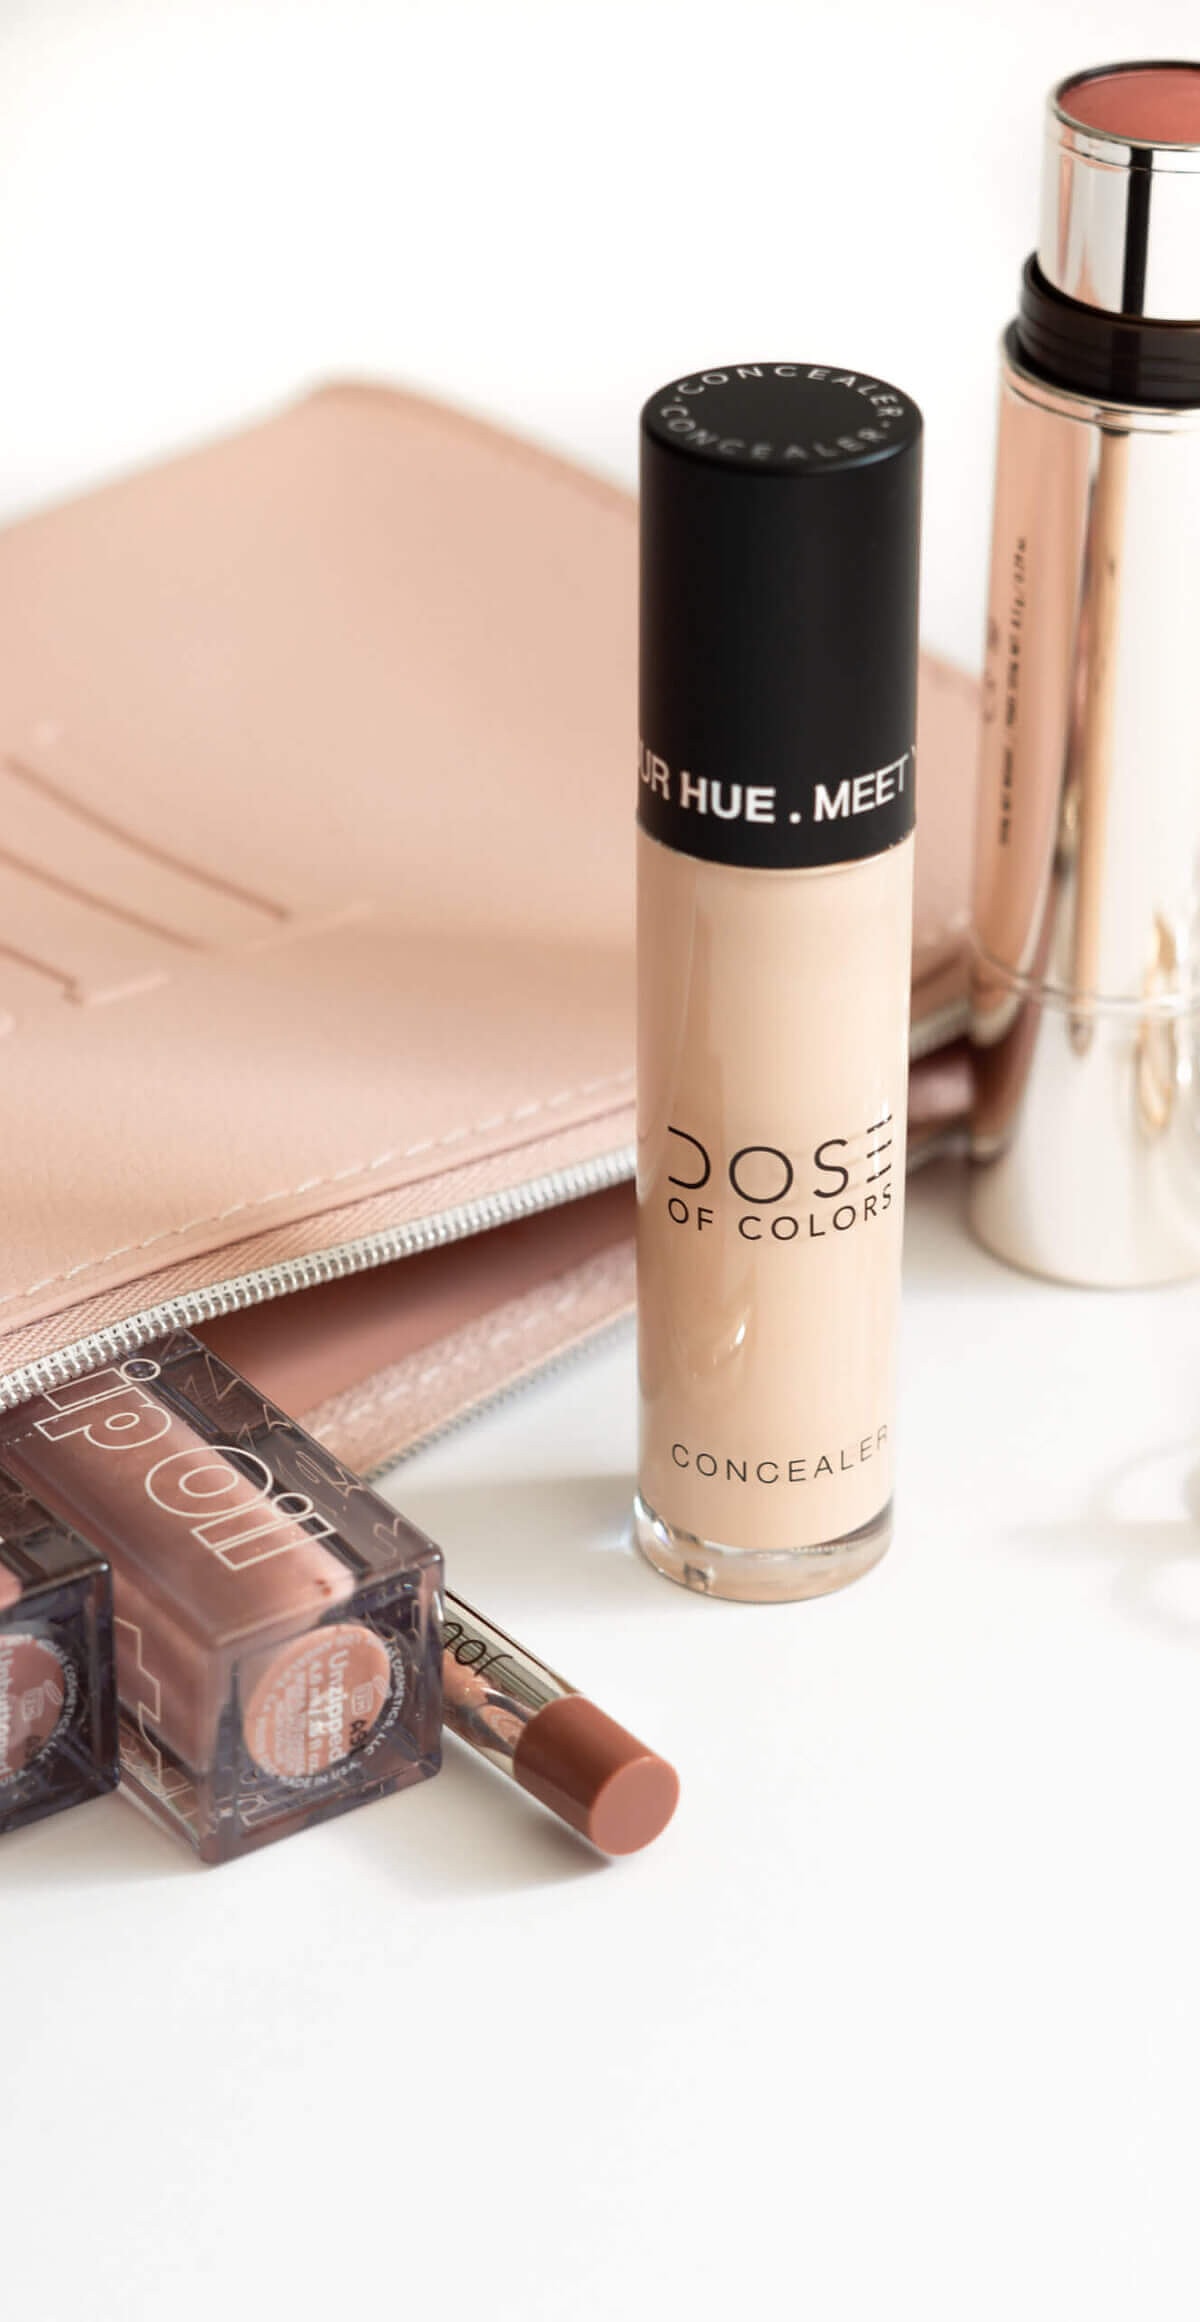 Dose Of Colors Concealer